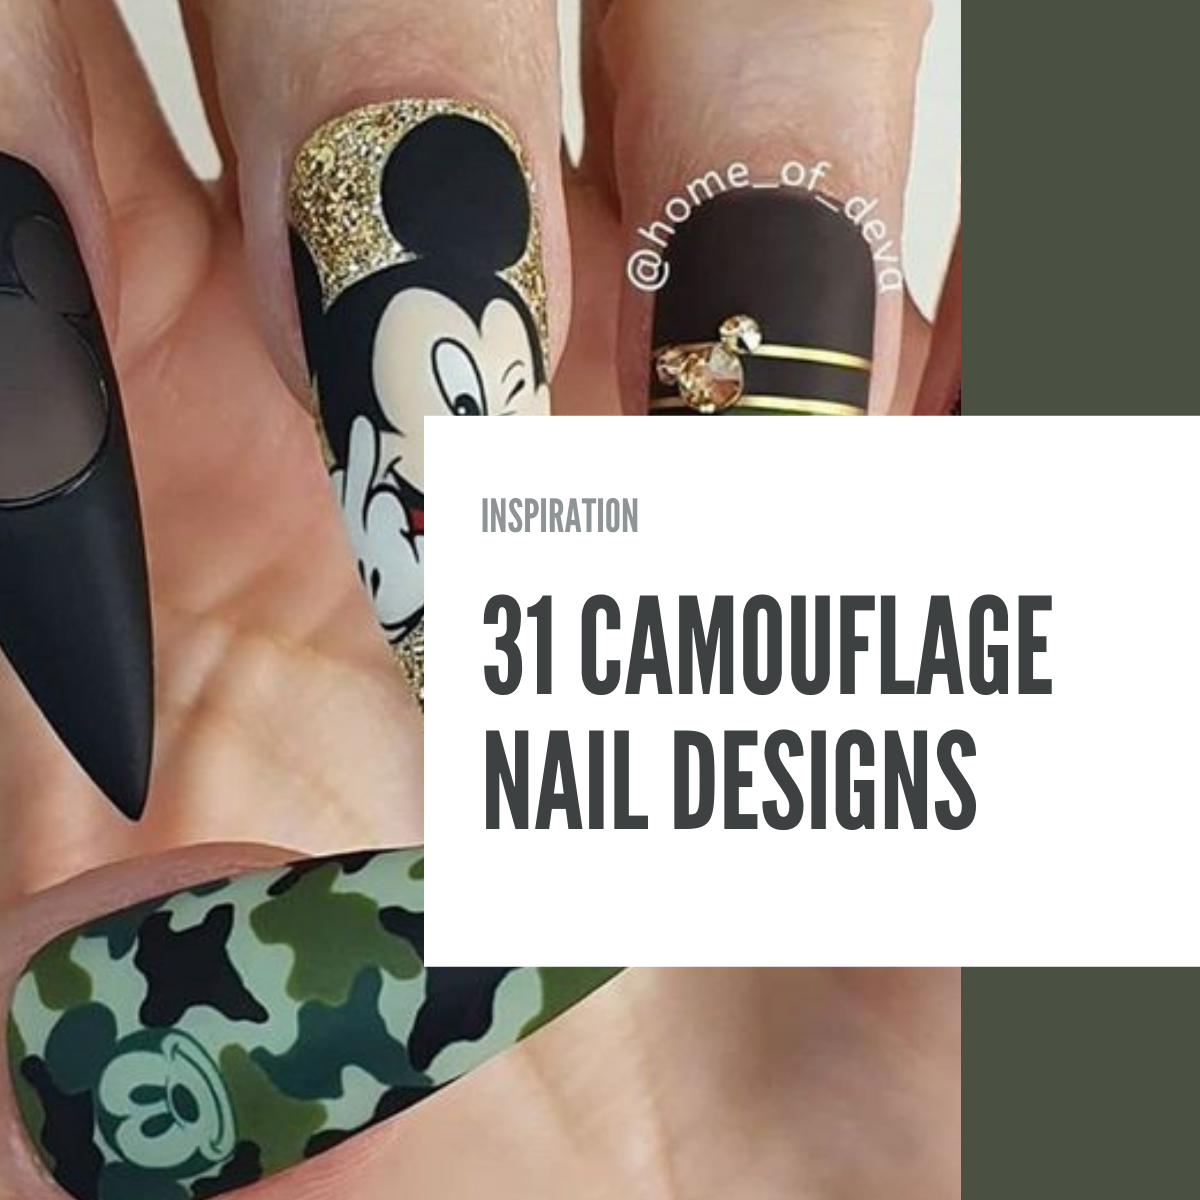 Camouflage Nail Designs